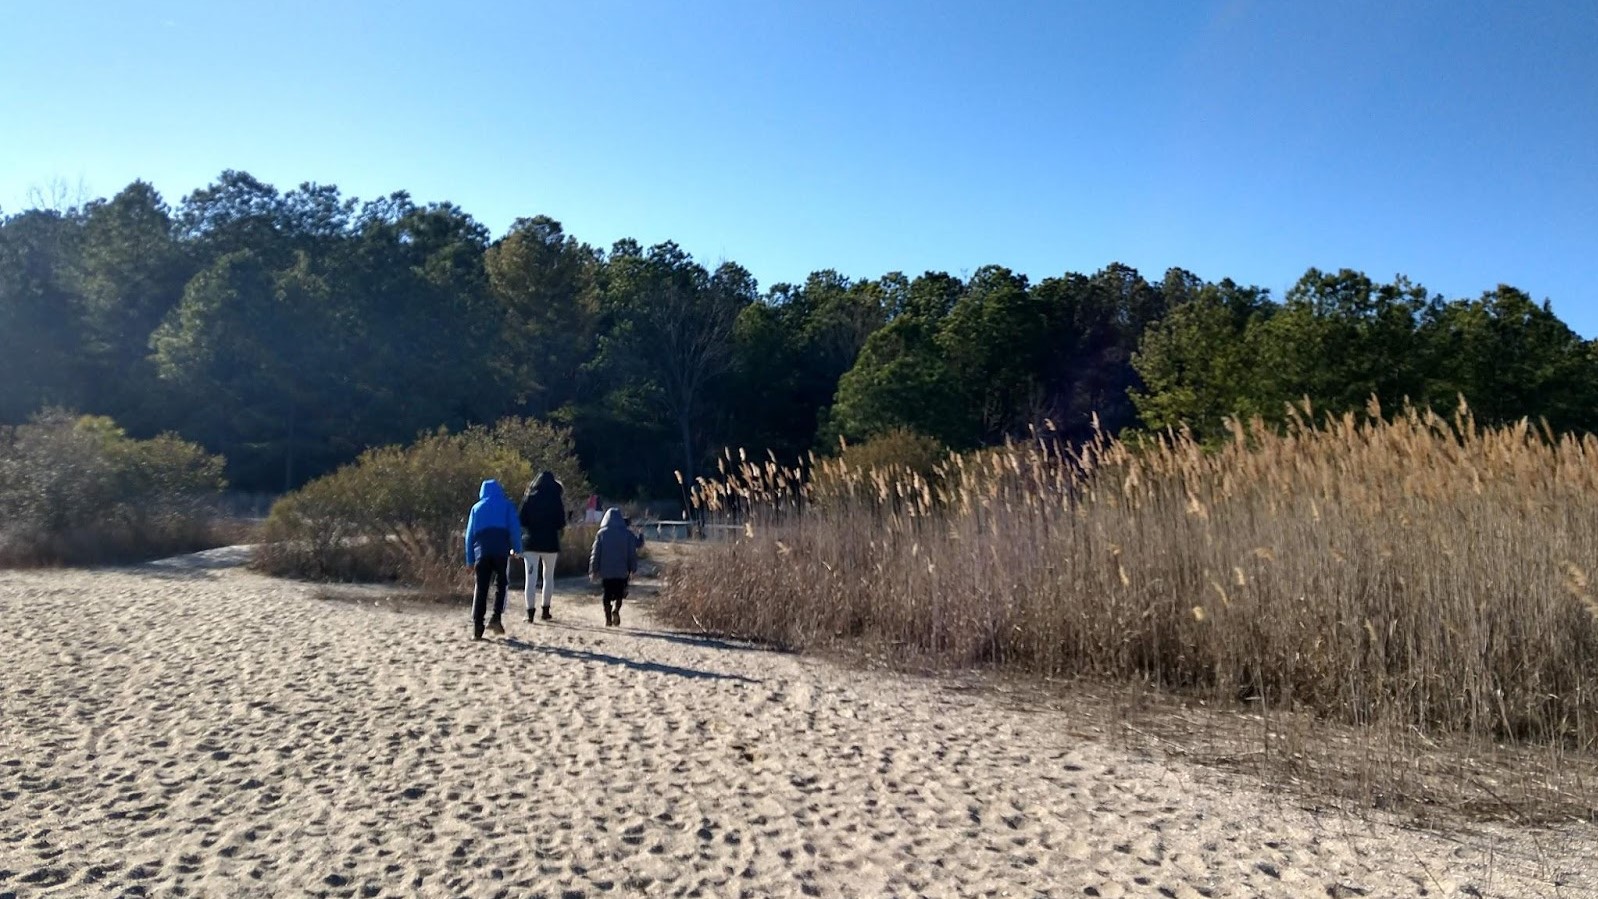 3 hikers one child hiking in sand, grasses, toward forest